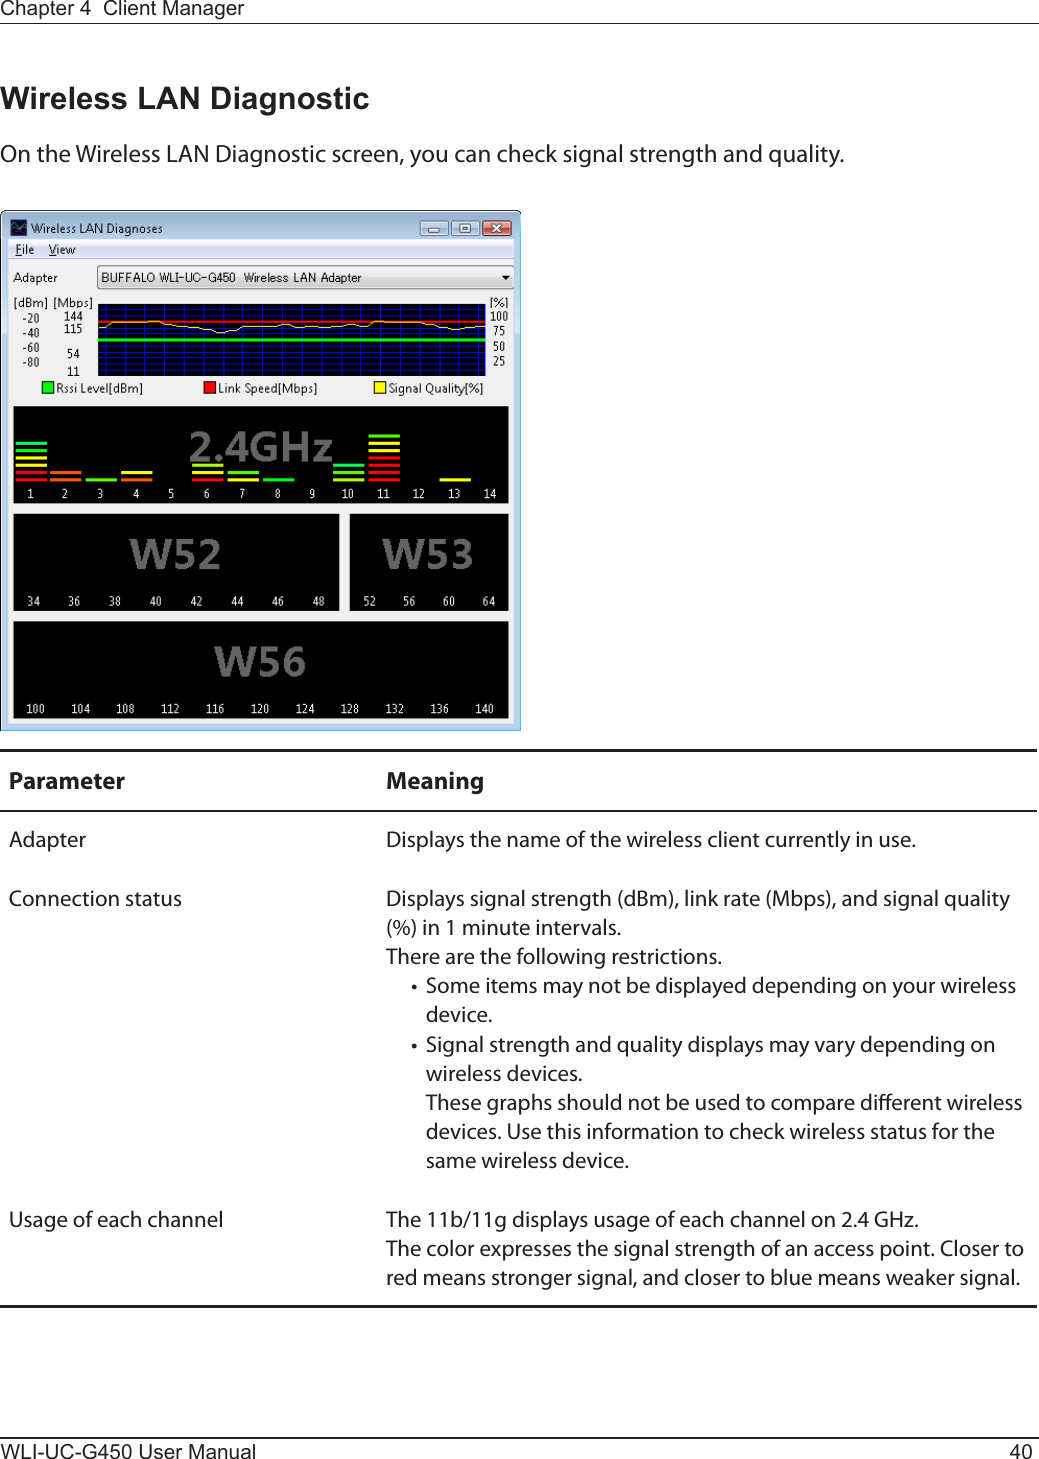 WLI-UC-G450 User Manual 40Chapter 4  Client ManagerWireless LAN DiagnosticOn the Wireless LAN Diagnostic screen, you can check signal strength and quality.Parameter MeaningAdapter Displays the name of the wireless client currently in use.Connection status Displays signal strength (dBm), link rate (Mbps), and signal quality (%) in 1 minute intervals.There are the following restrictions.  •  Some items may not be displayed depending on your wireless device.  •  Signal strength and quality displays may vary depending on wireless devices.    These graphs should not be used to compare dierent wireless devices. Use this information to check wireless status for the same wireless device.Usage of each channel The 11b/11g displays usage of each channel on 2.4 GHz.The color expresses the signal strength of an access point. Closer to red means stronger signal, and closer to blue means weaker signal.